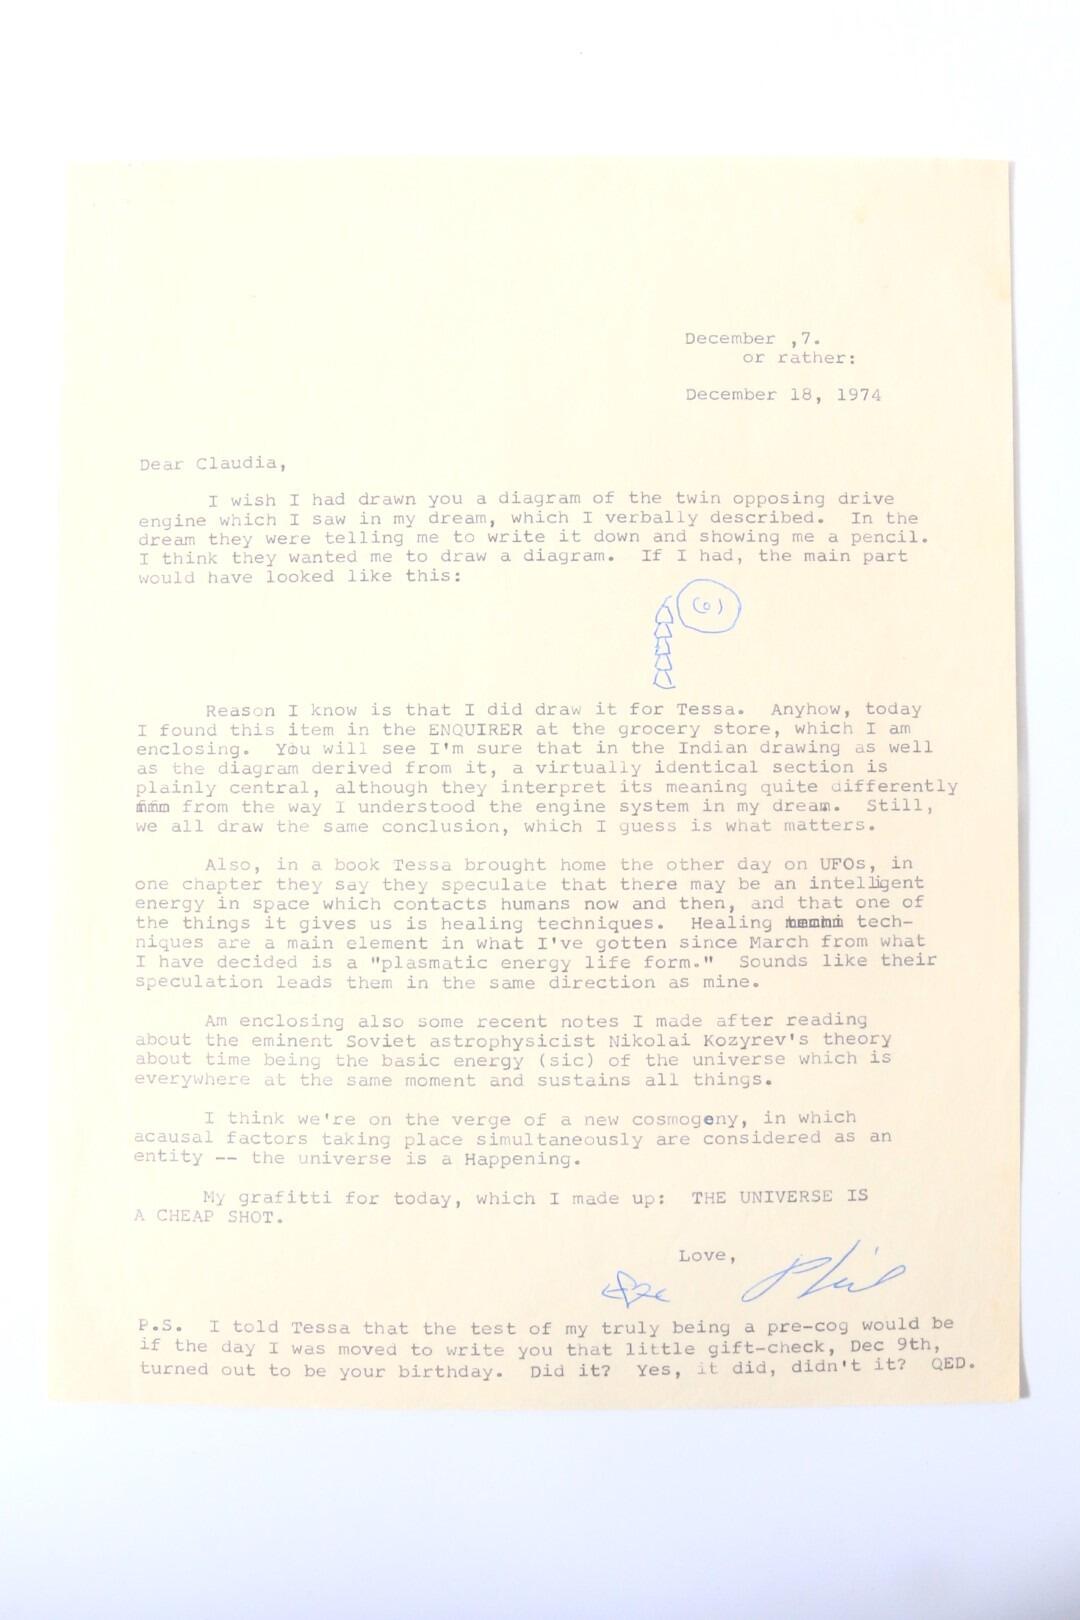 Philip K. Dick - Typed Letter Signed [TLS] to Claudia Bush - No Publisher, 1974.